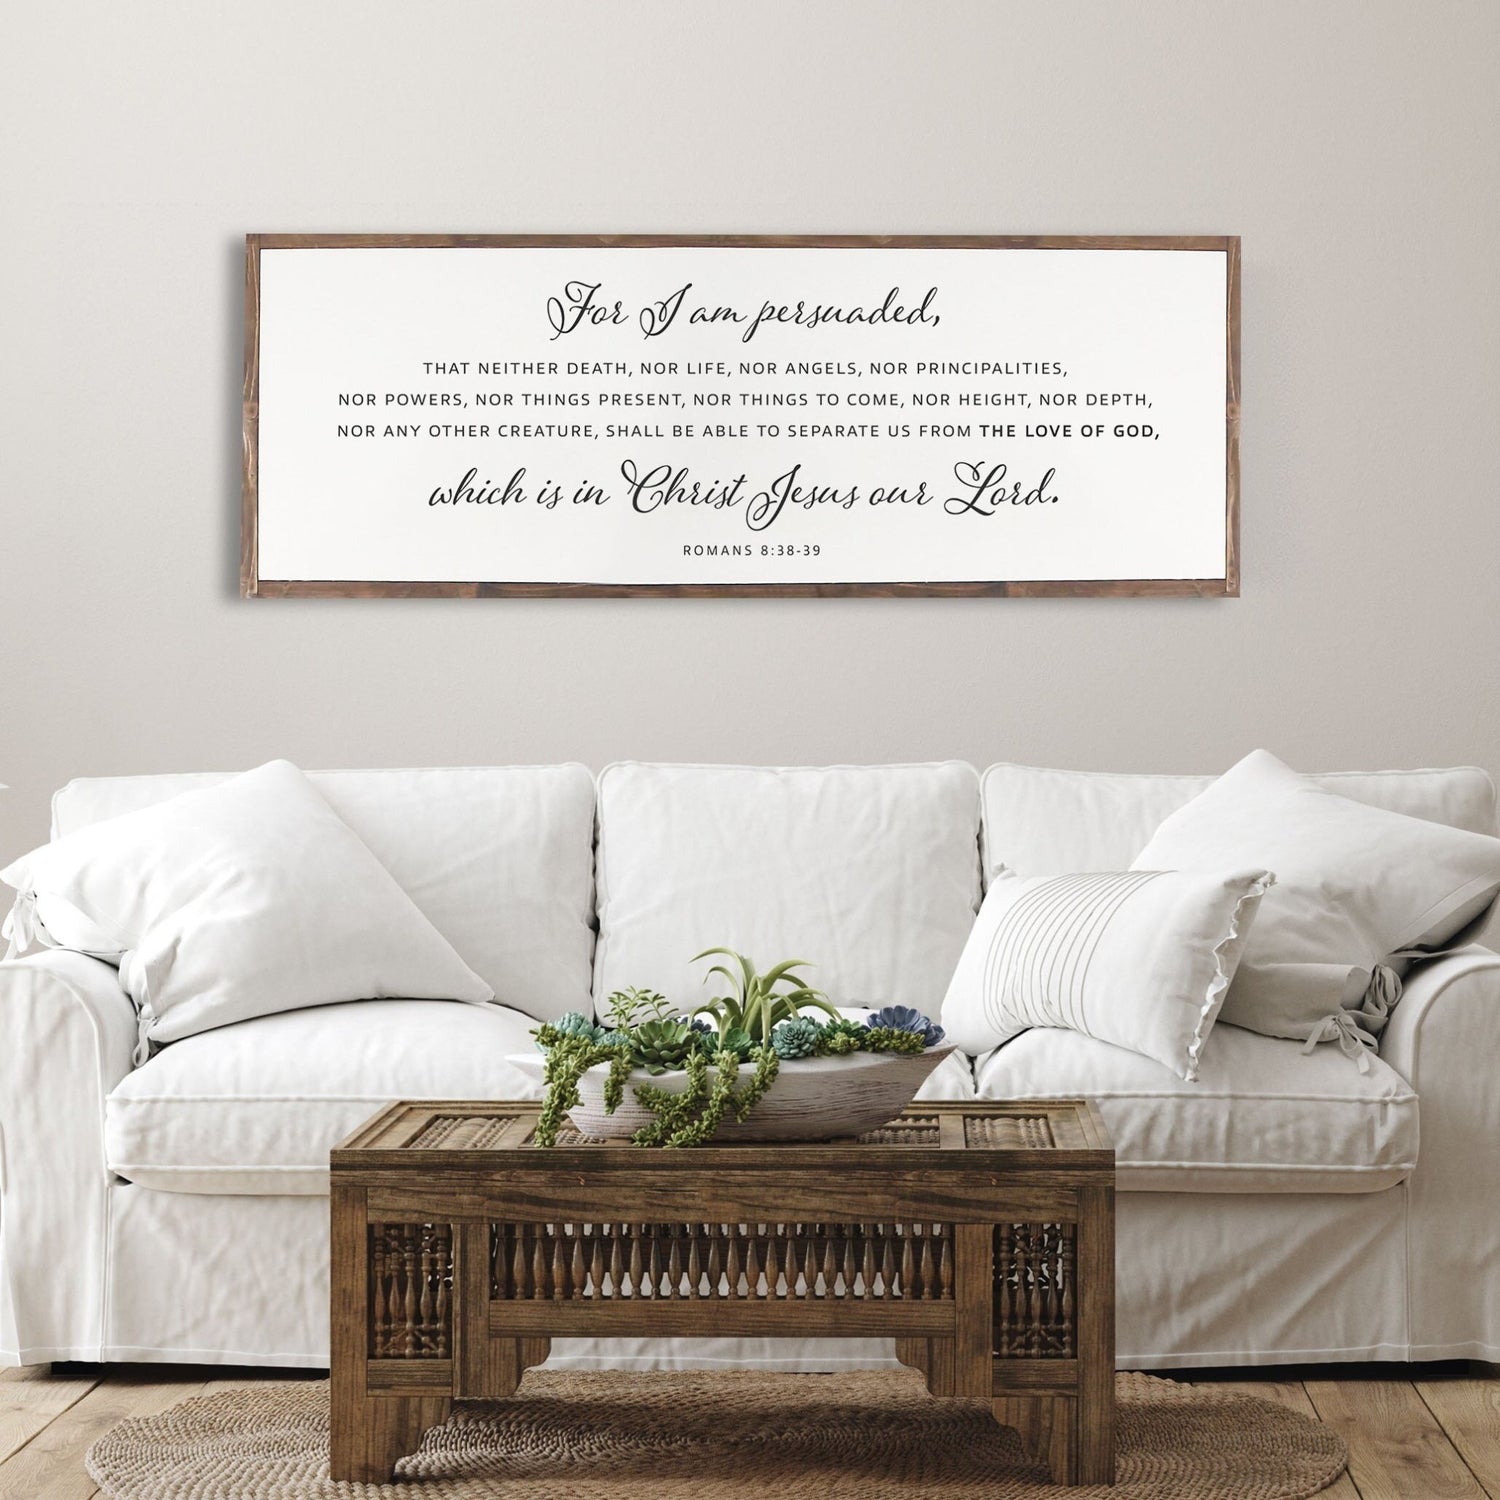 John 8:12 Vinyl Wall Decal by Wild Eyes Signs, I am the Light of the World,  Scripture Wall Vinyl, Bible Wall Words, Living Room, Modern Christian